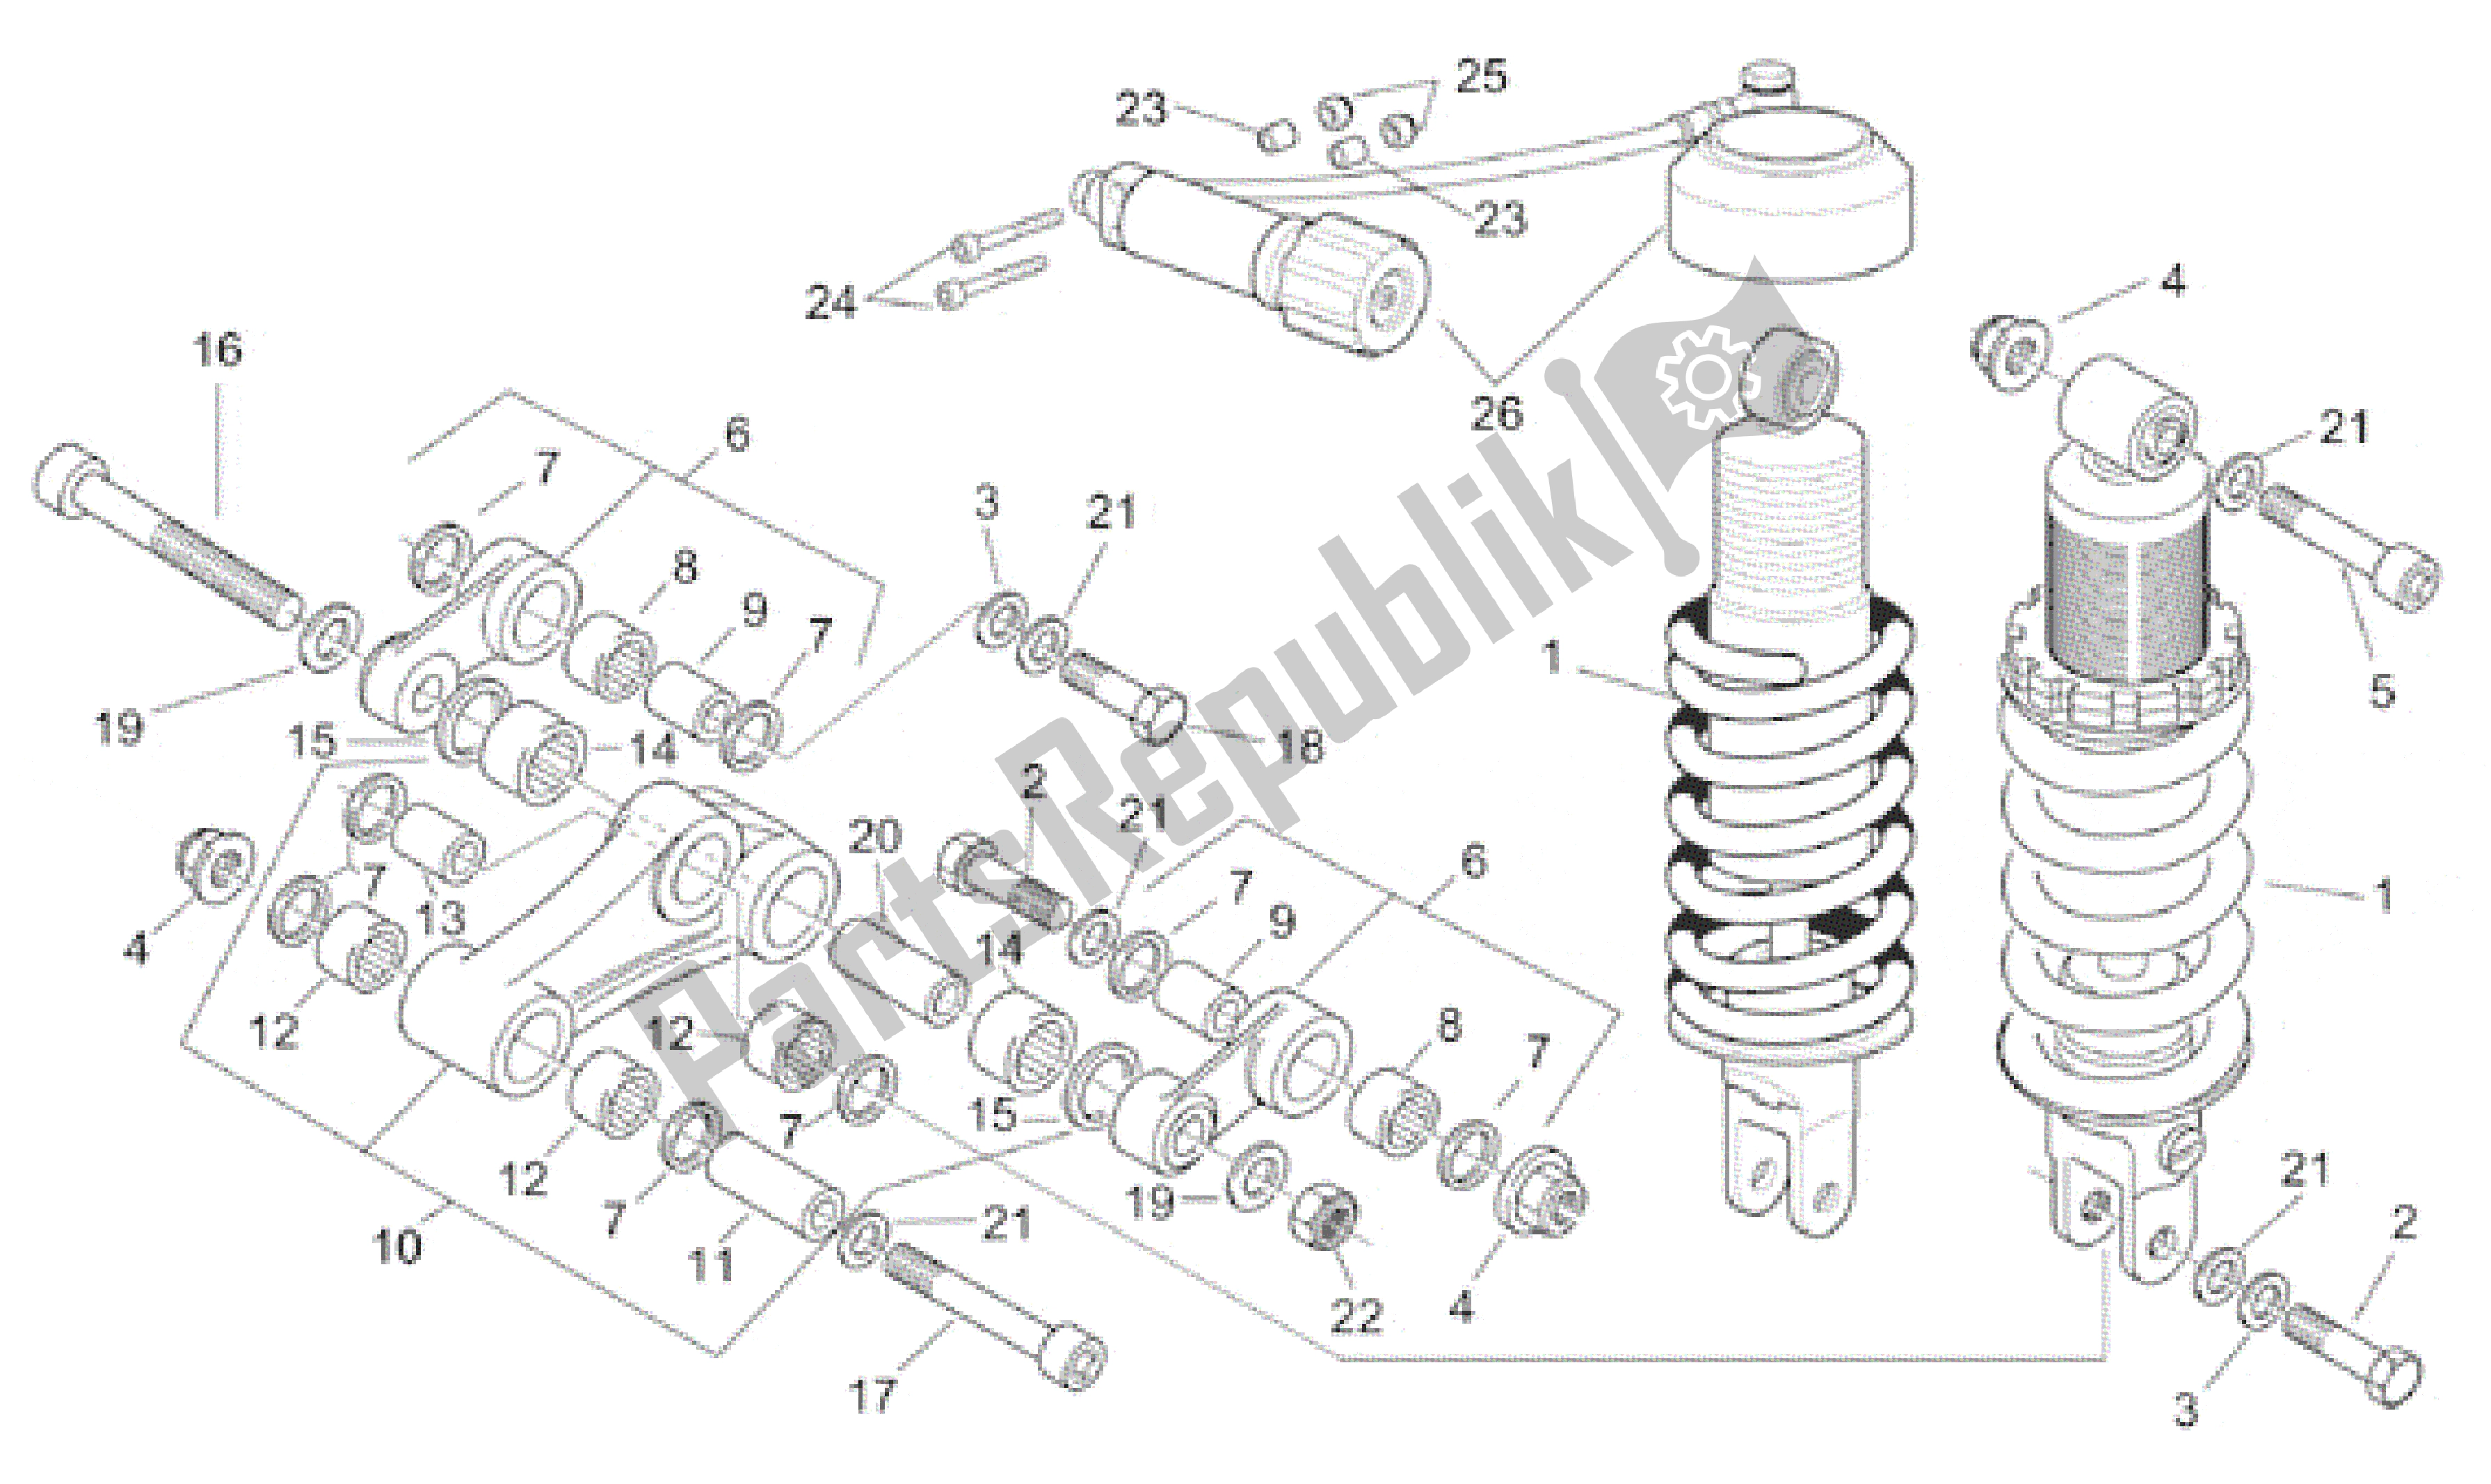 All parts for the Rear Shock Absorber of the Aprilia Pegaso 650 2001